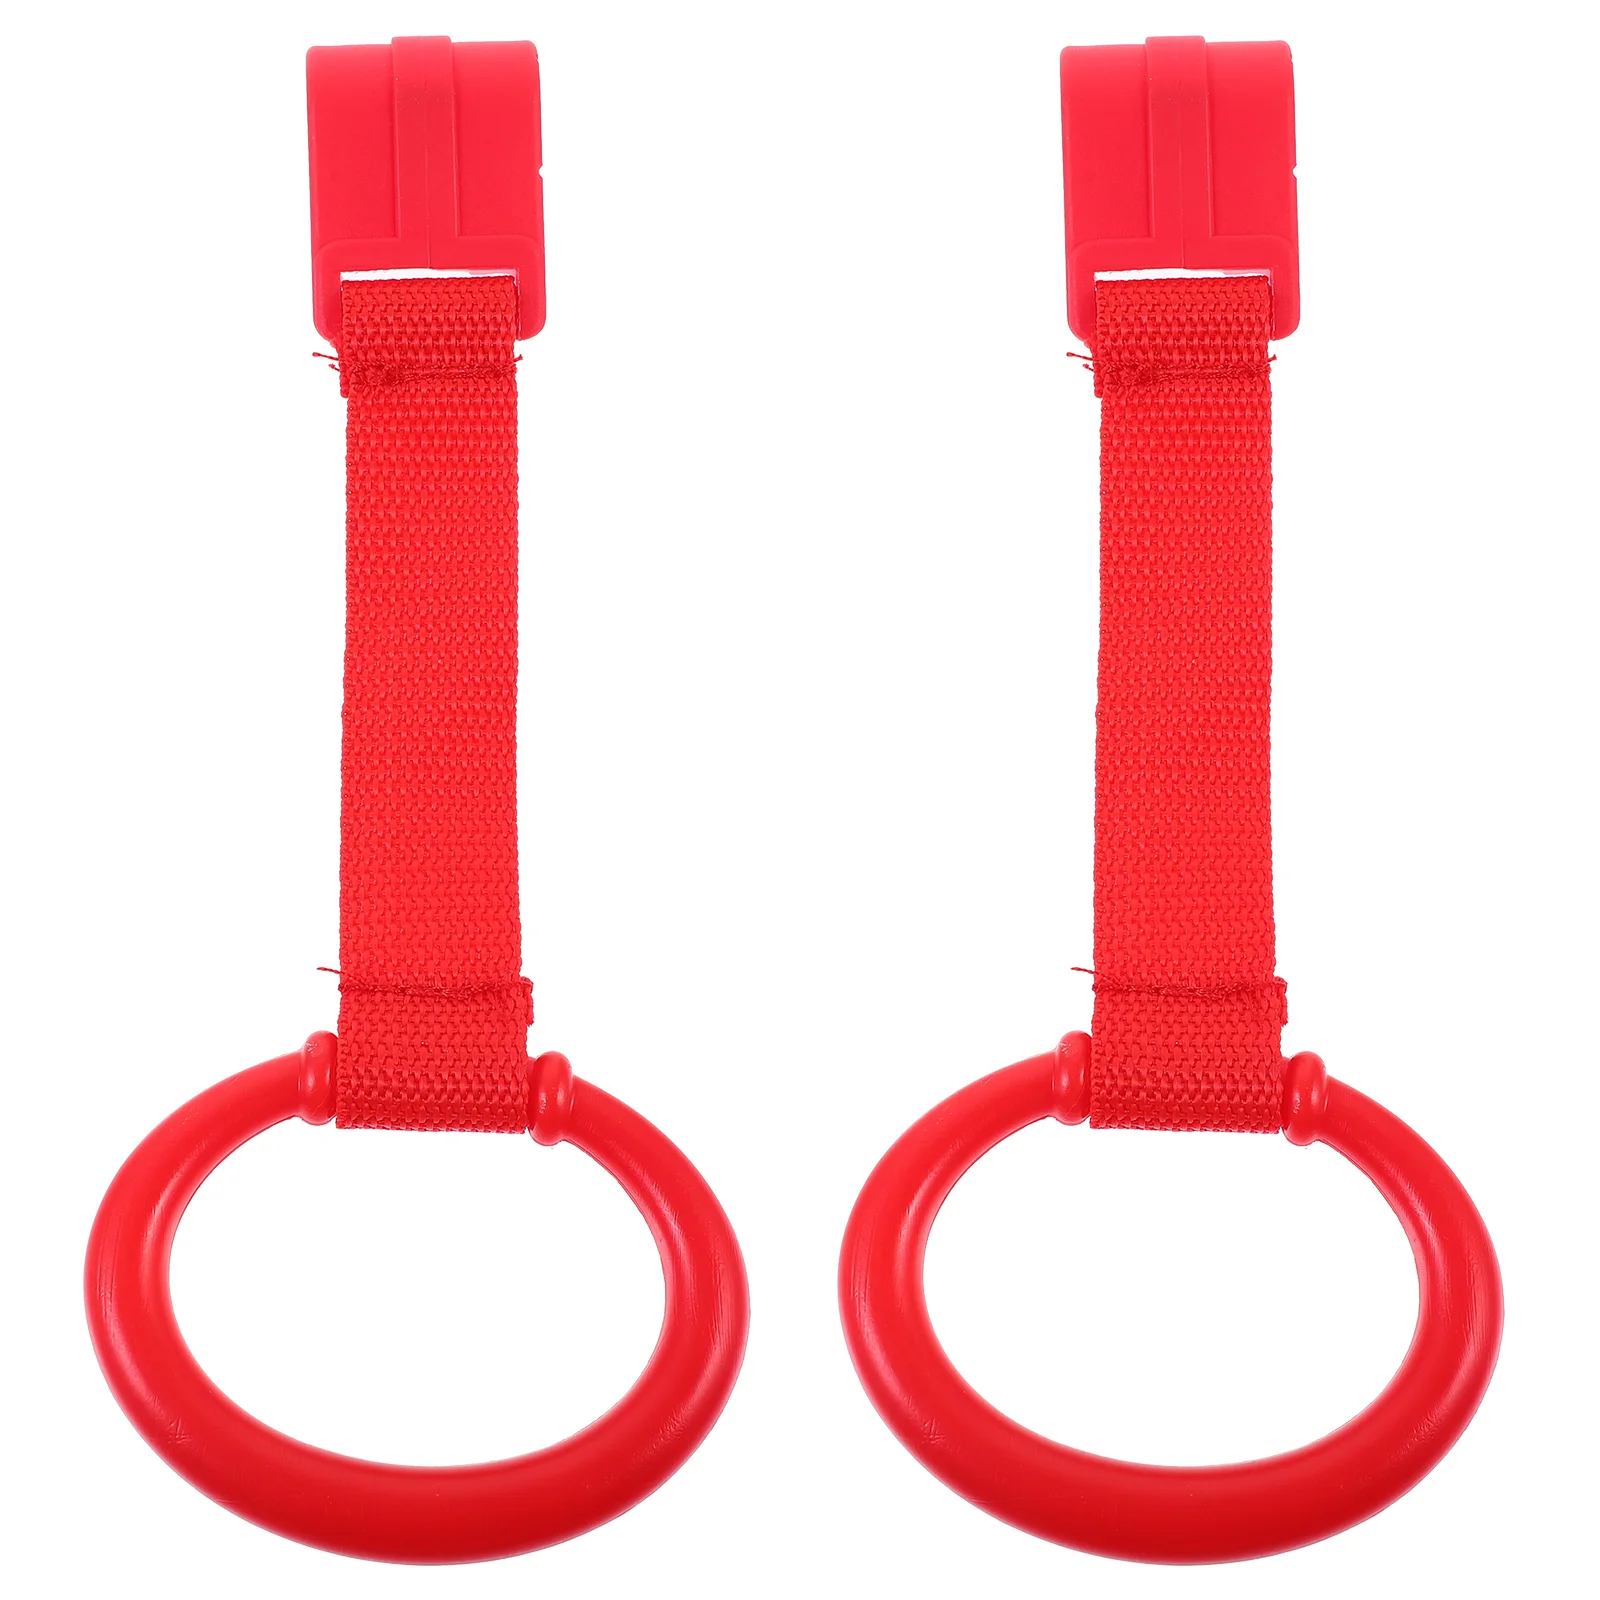 

2 Pcs Children's Playpen Hand Pull Ring Crib Hanging Standing Toddler Baby Nursery Rings Tools Cot for Kids Vertical Infant Bed